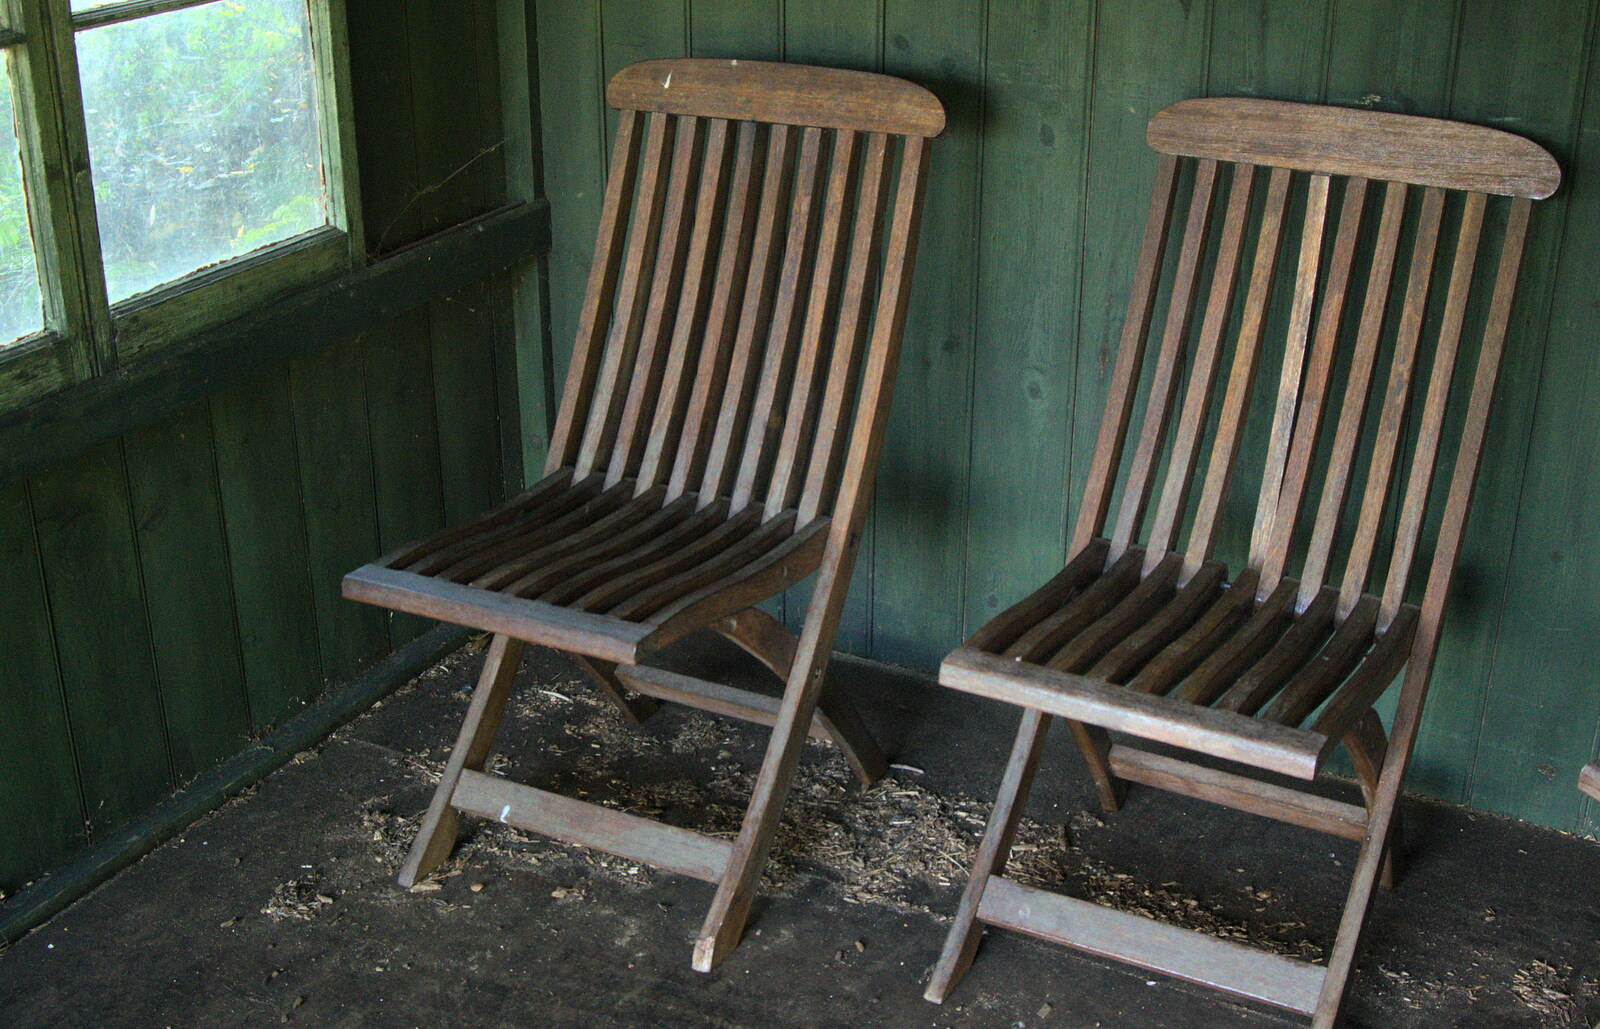 A pair of teak garden chairs in a shed from Alan Bloom's Gardens, Bressingham, Norfolk - 6th October 2012